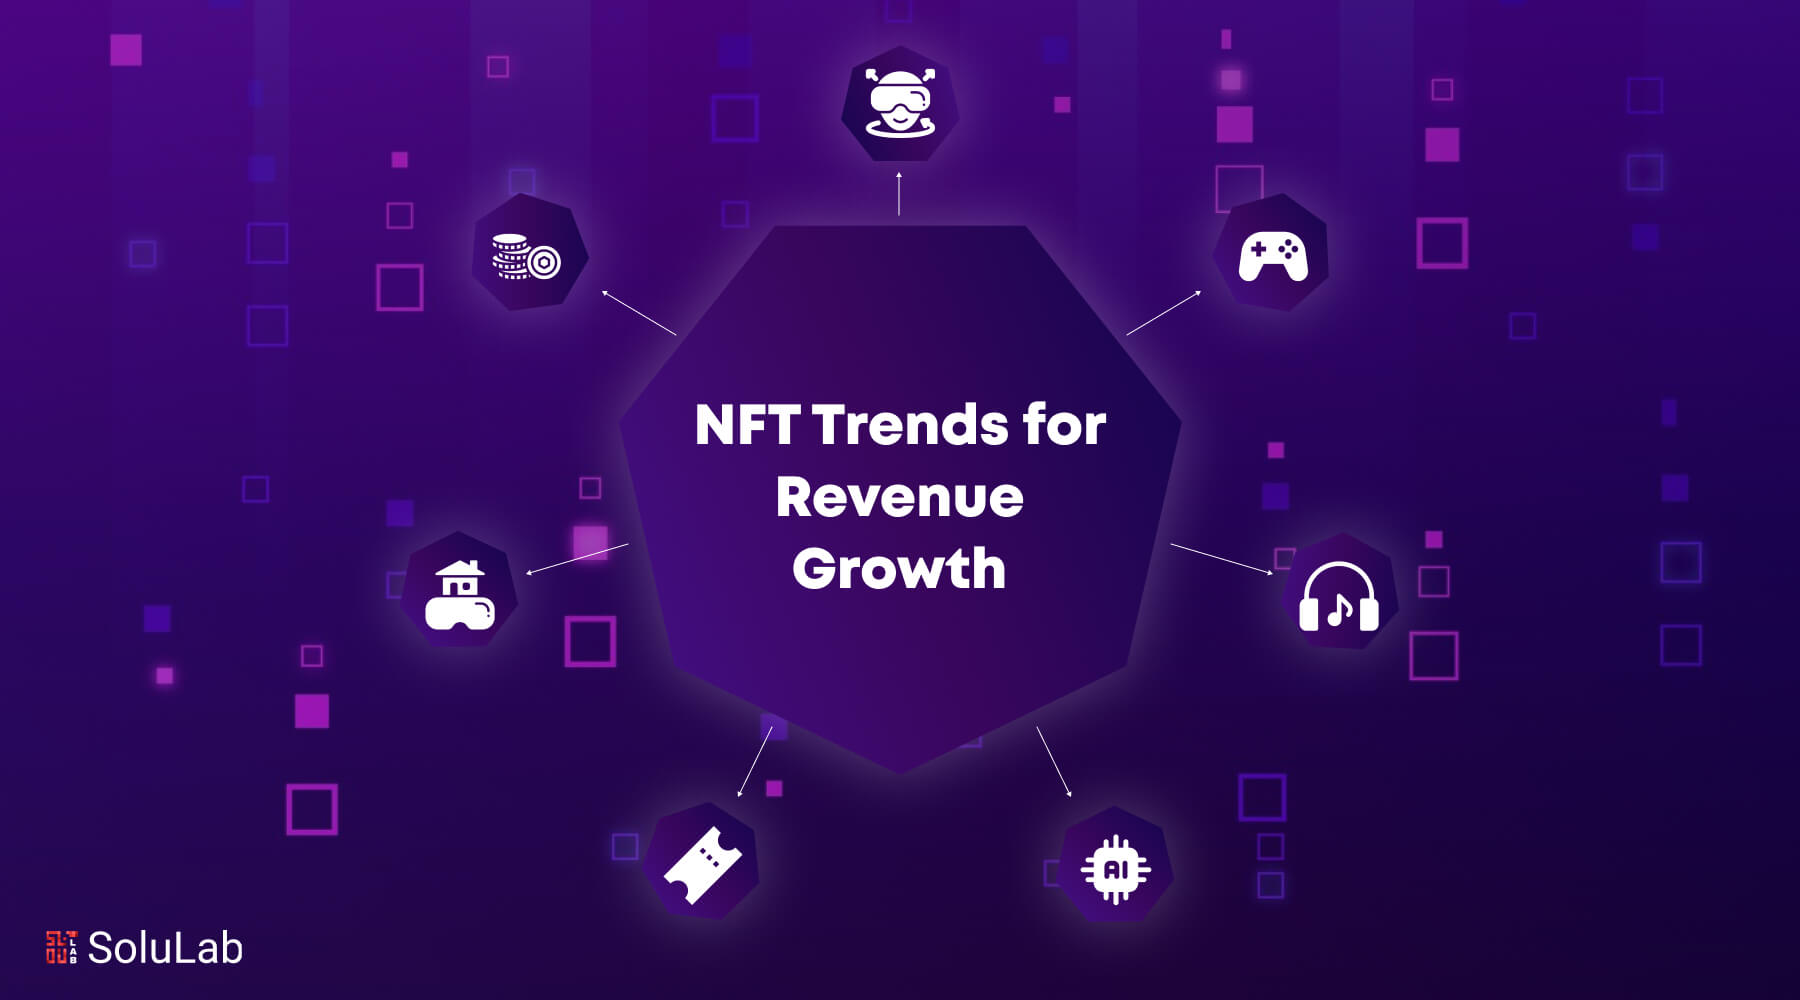 NFT Trends for Revenue Growth